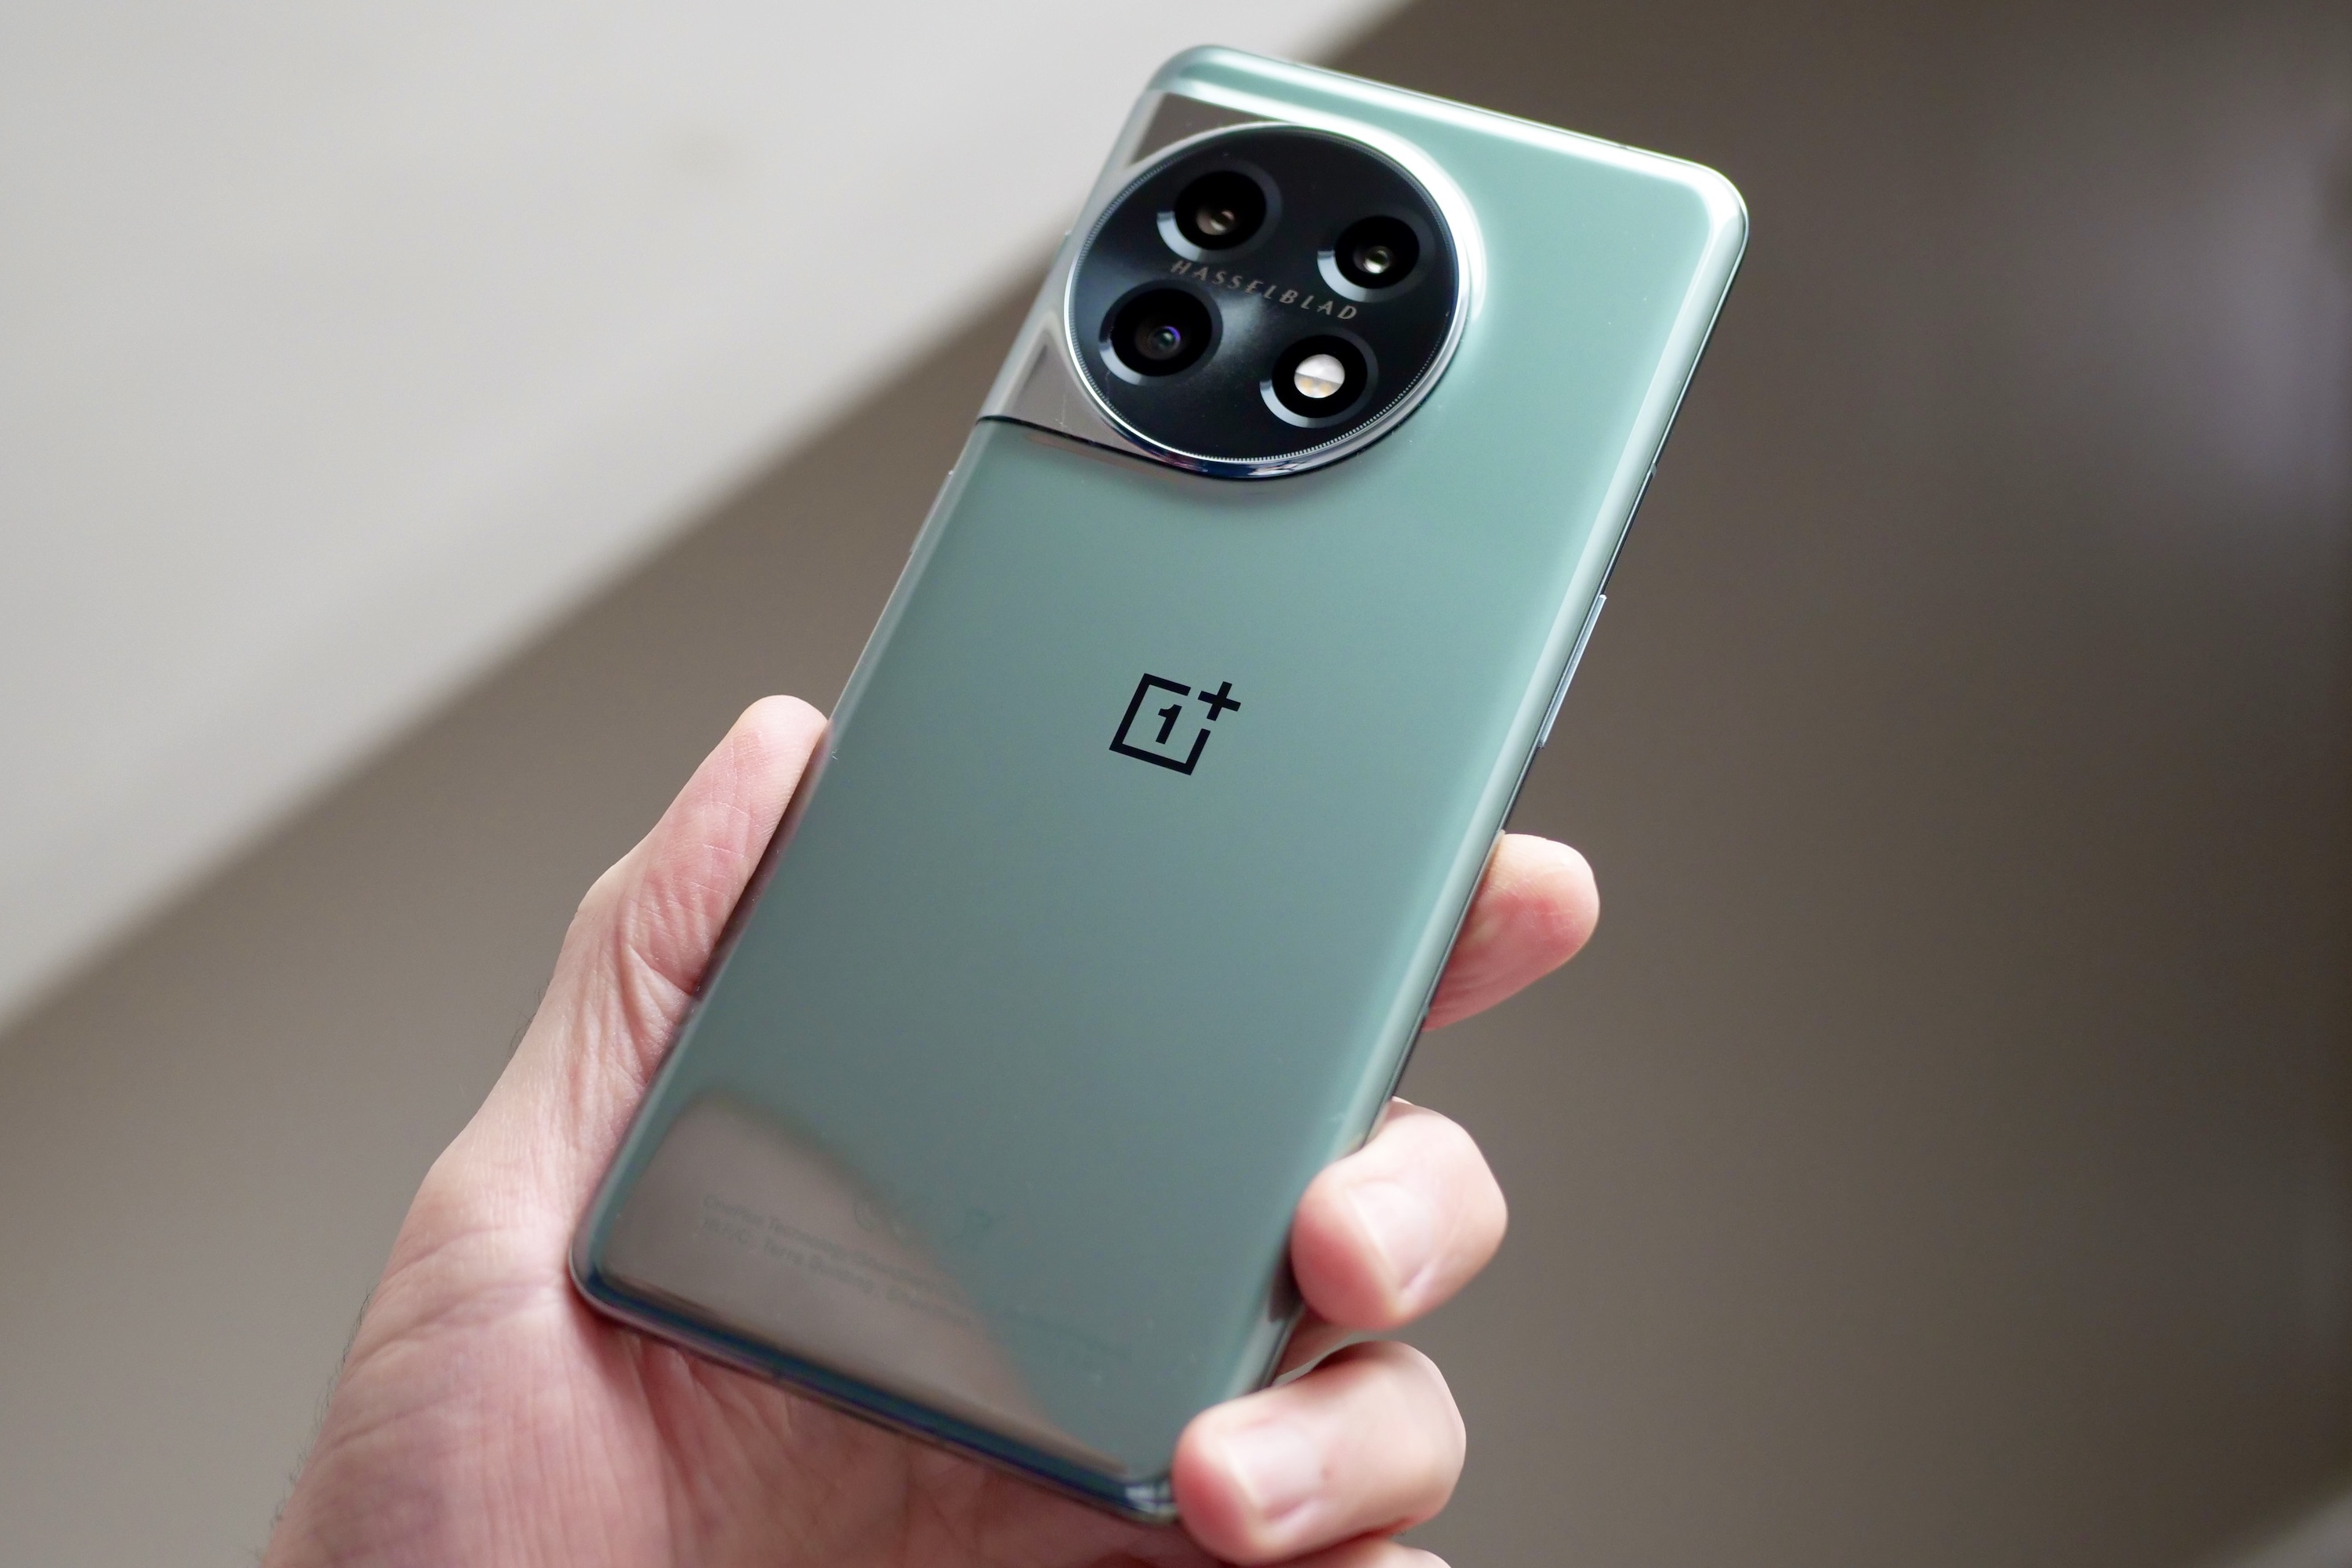 The OnePlus 11 held in a person's hand and seen from the back.